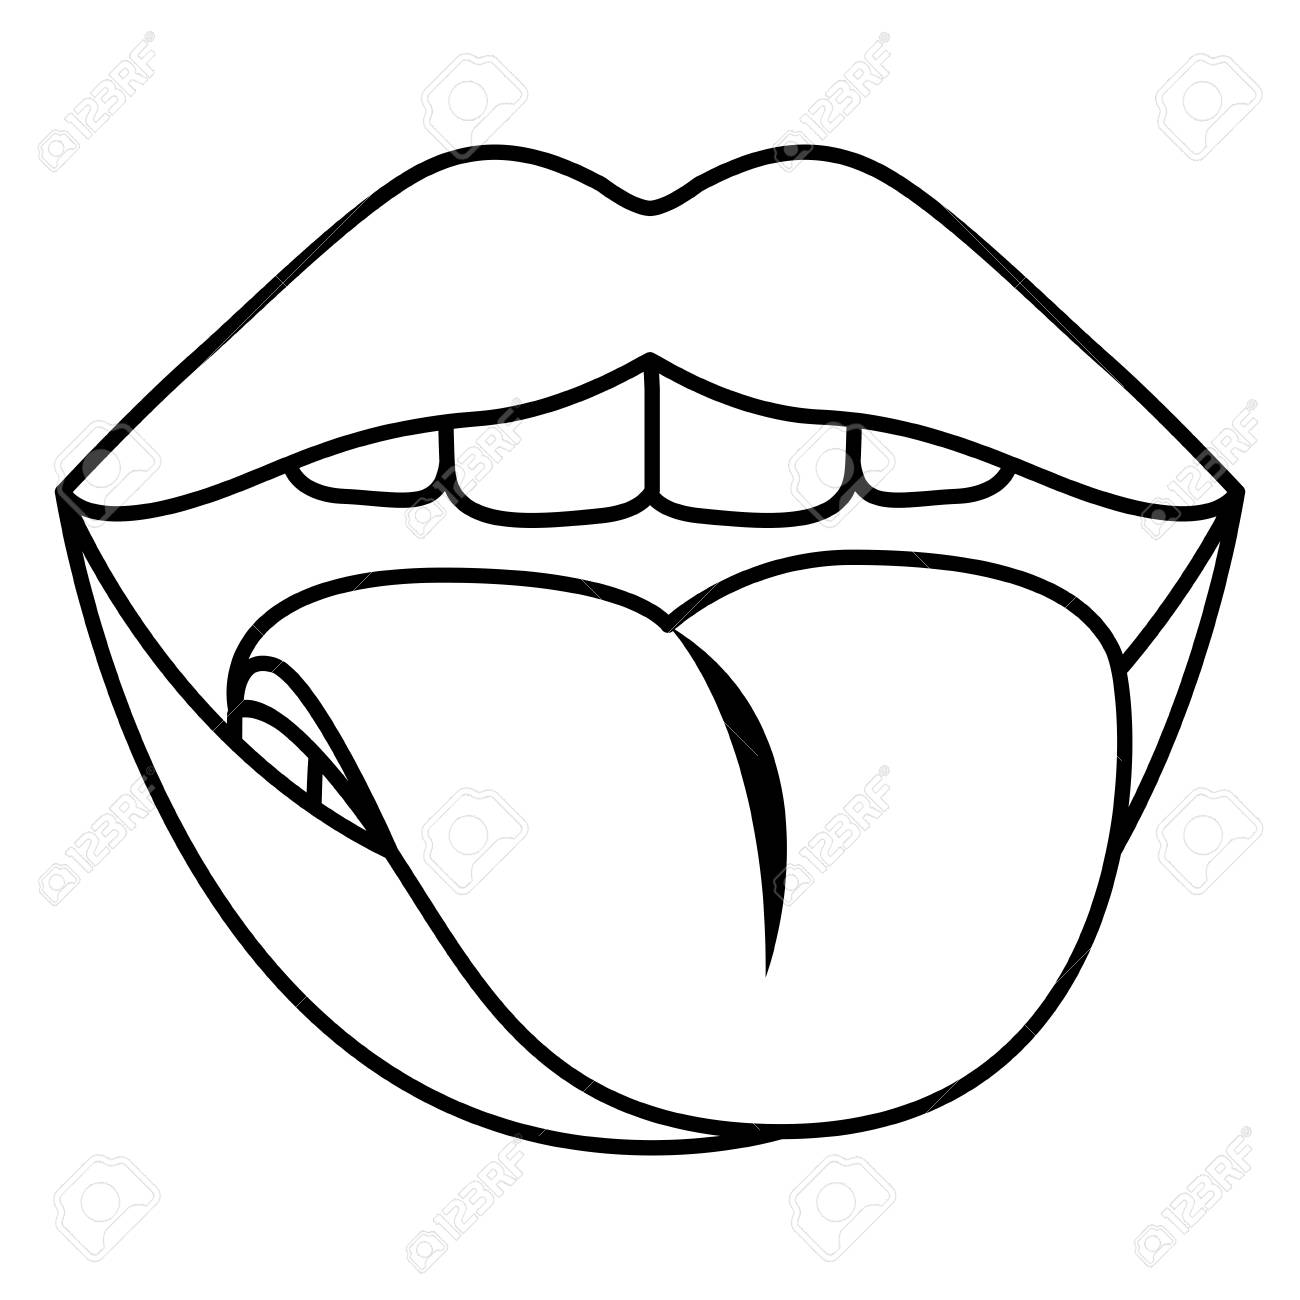 Lips with tongue out vector illustration design.